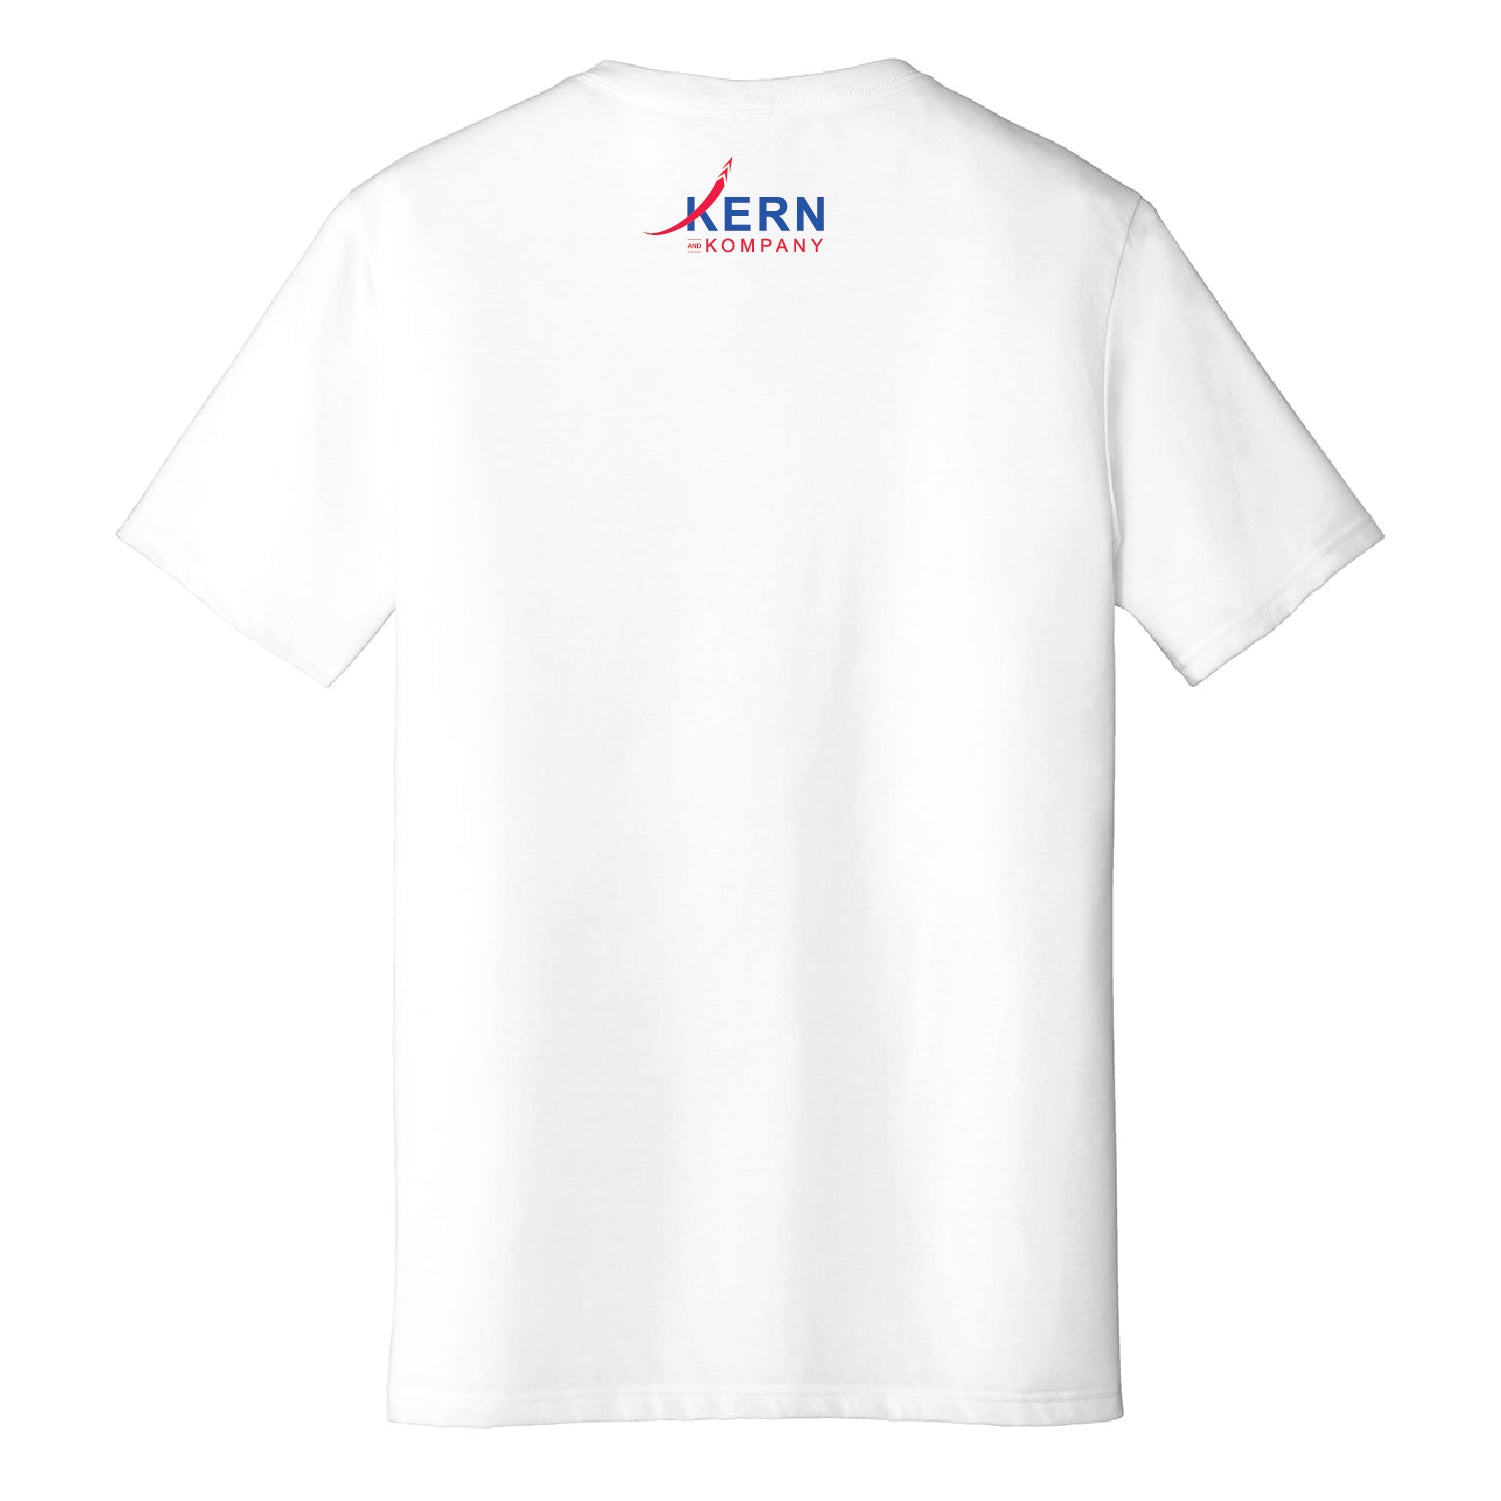 Airshow Member Perfect Tri V-Neck Tee - DSP On Demand